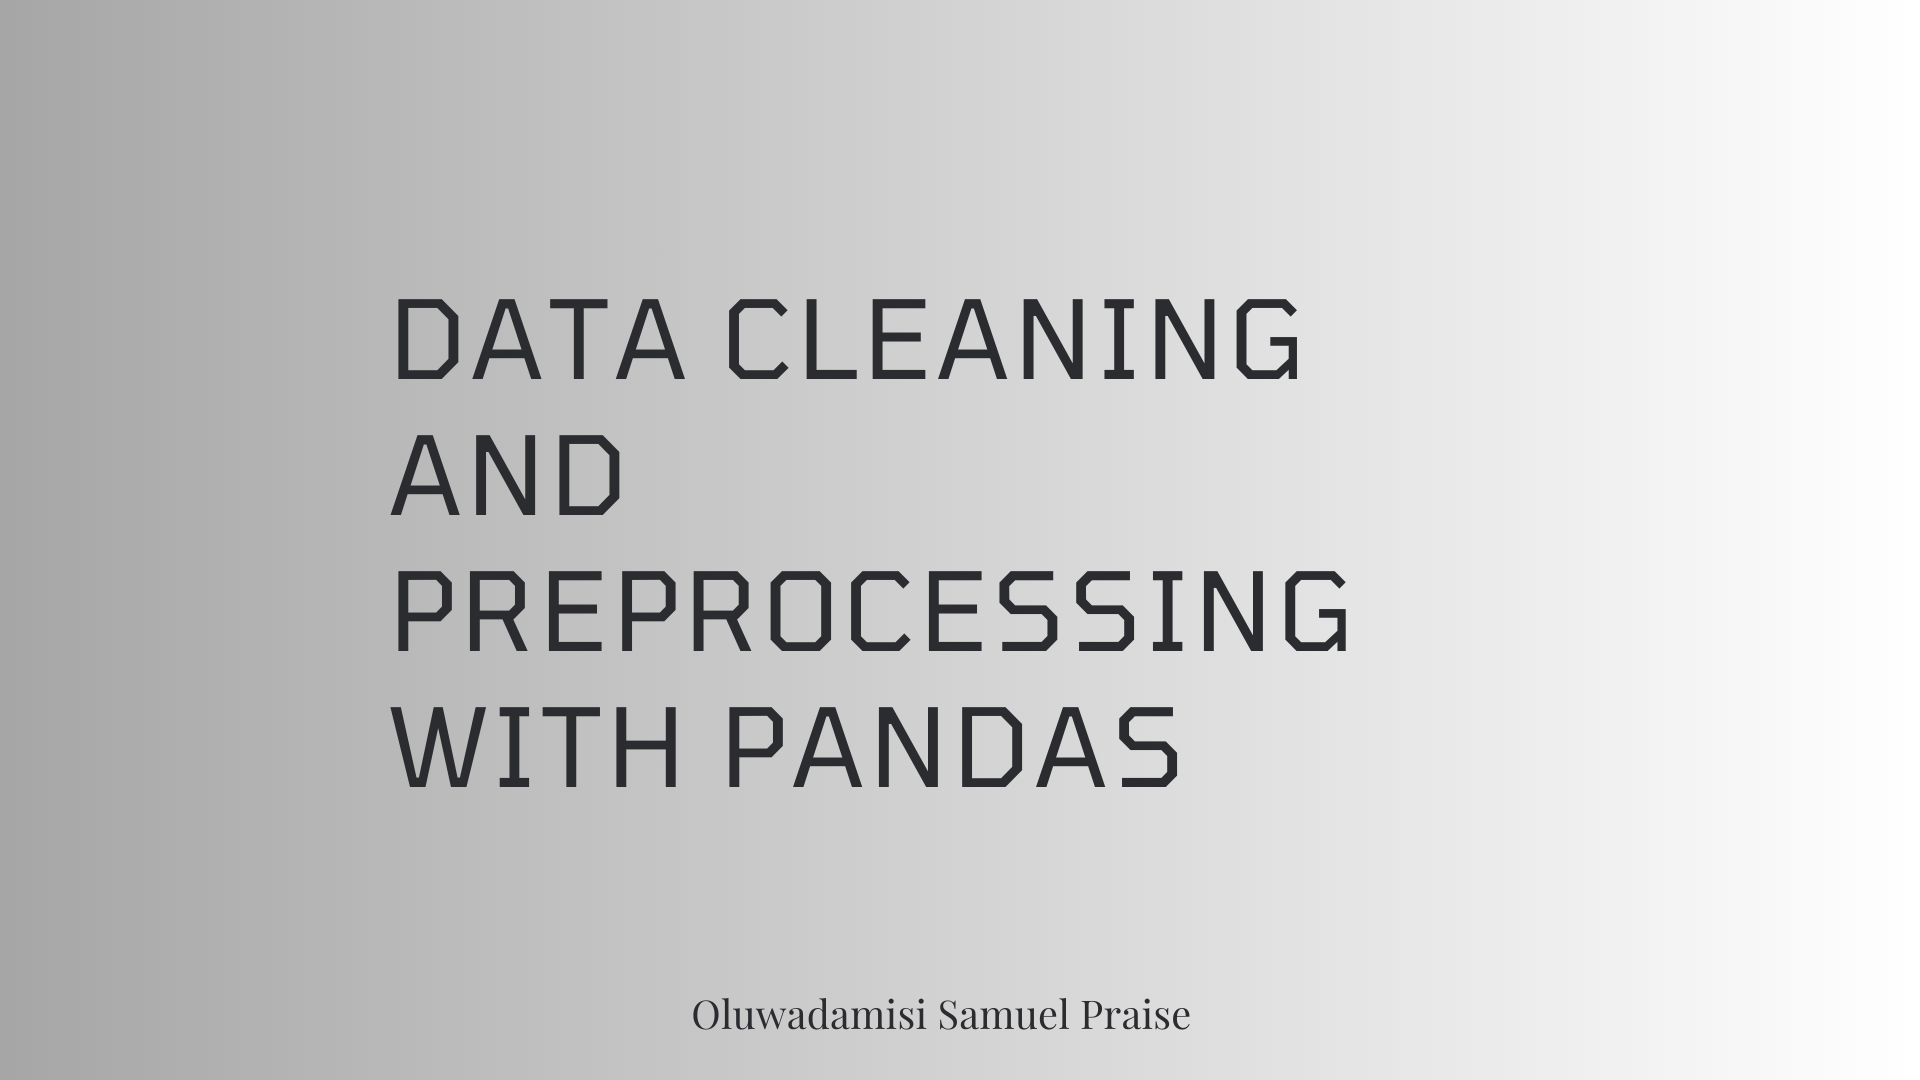 How to Use Pandas for Data Cleaning and Preprocessing